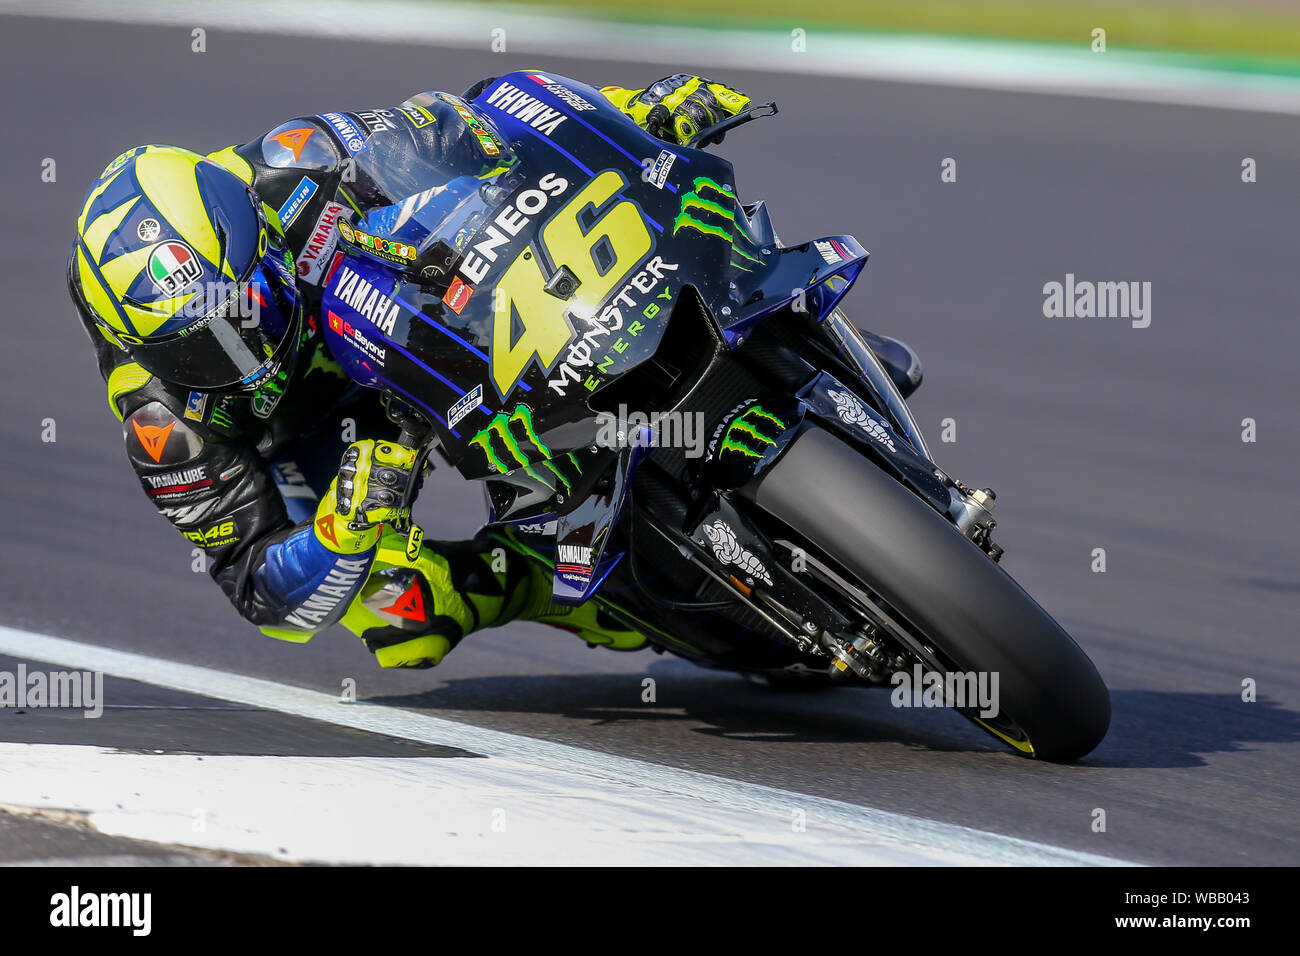 Silverstone, UK. 25th June, 2019. MotoGP rider Valentino Rossi (Monster  Energy Yamaha MotoGP) during warm up at the 2019 GoPro British Grand Prix ( MotoGP) at Silverstone Circuit, Towcester, England on 25 August